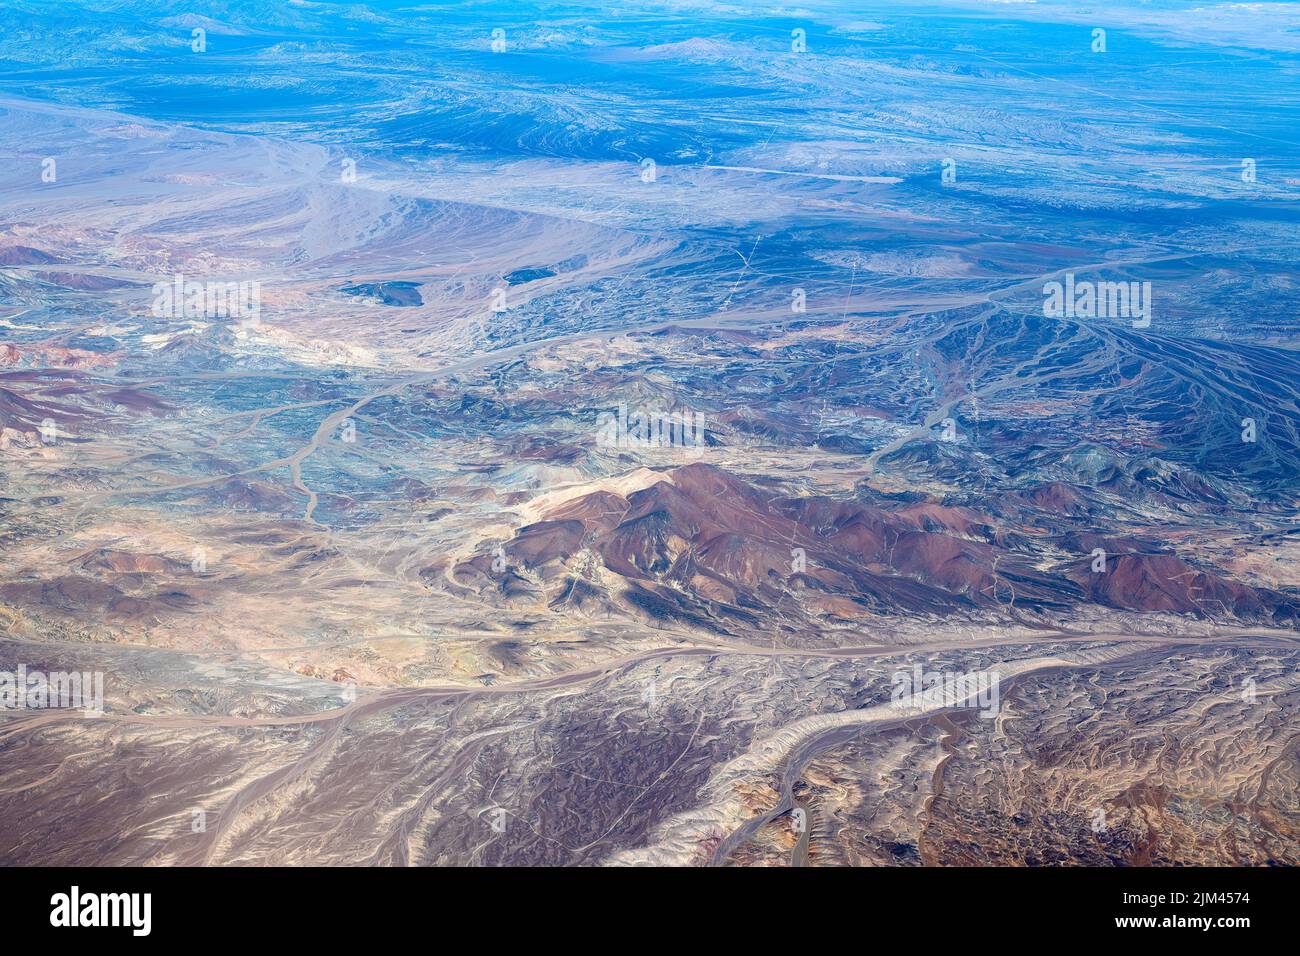 Aerial view of the highlands of the Atacama Desert, Chile Stock Photo